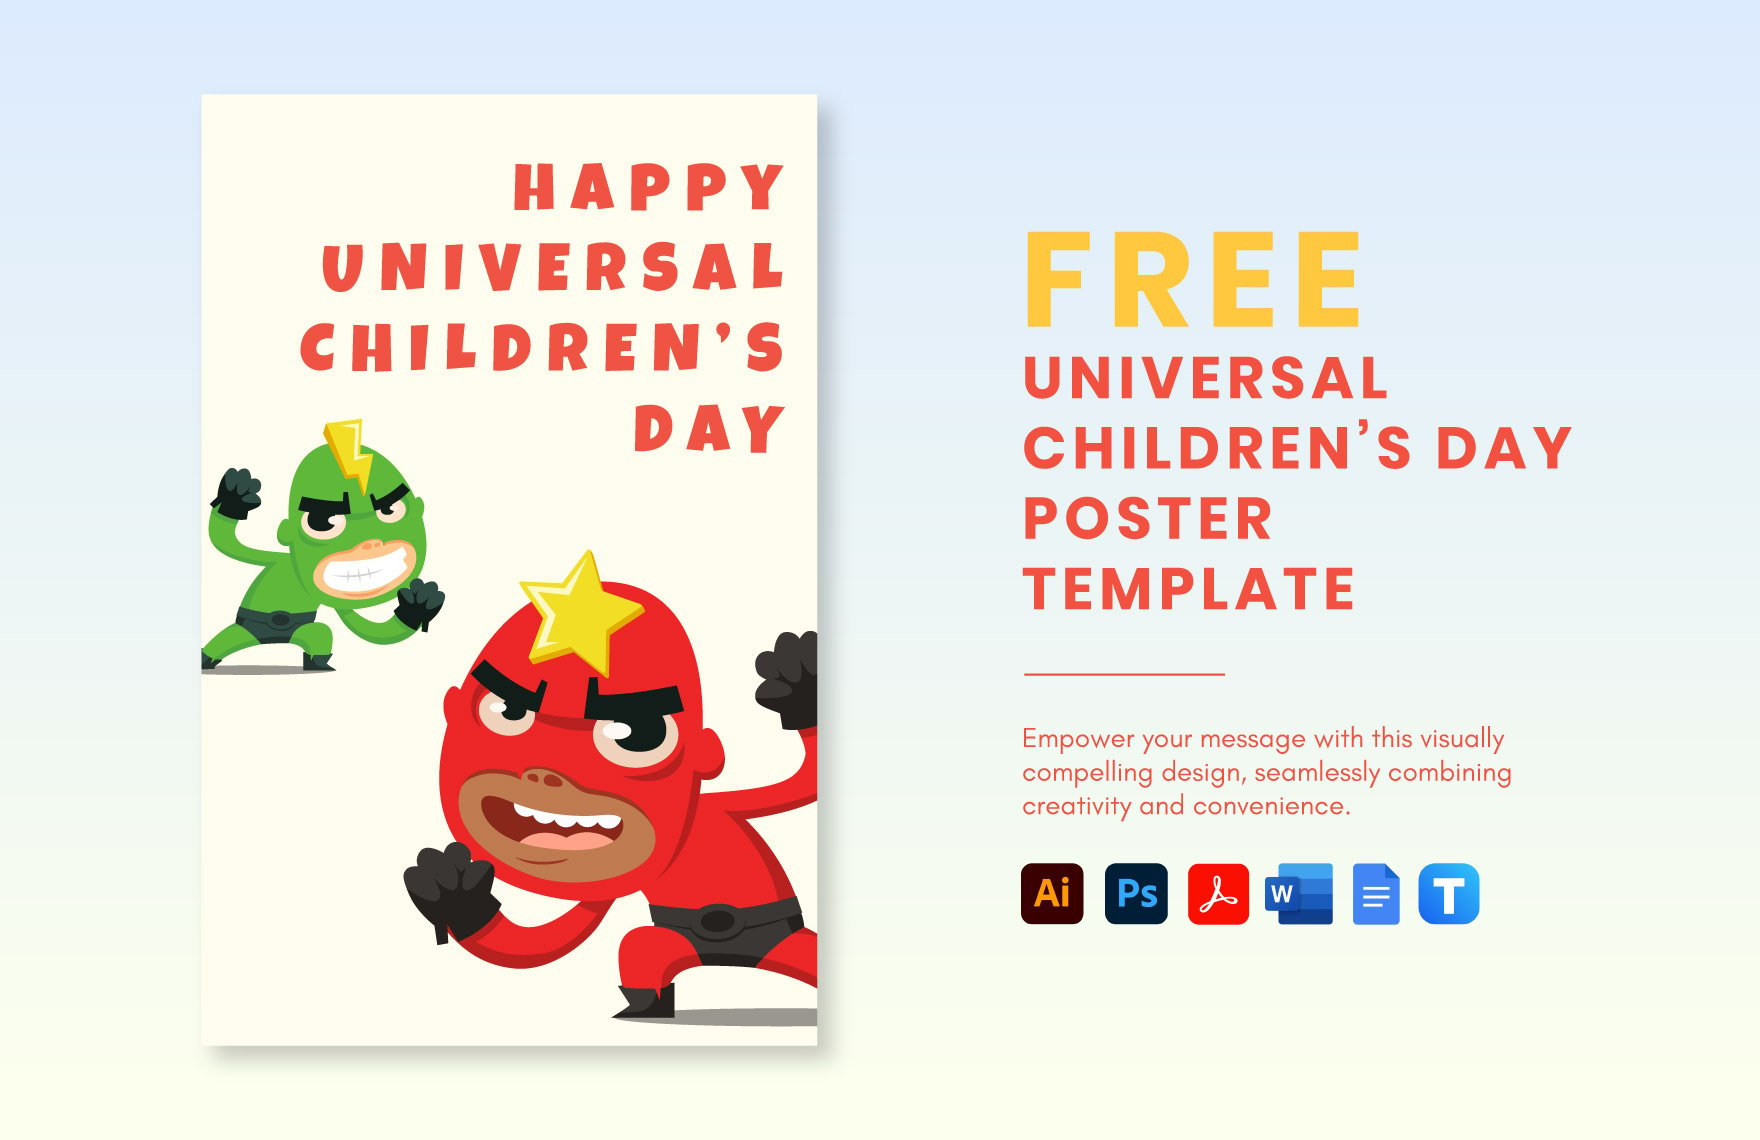 Free Universal Children’s Day Poster Template